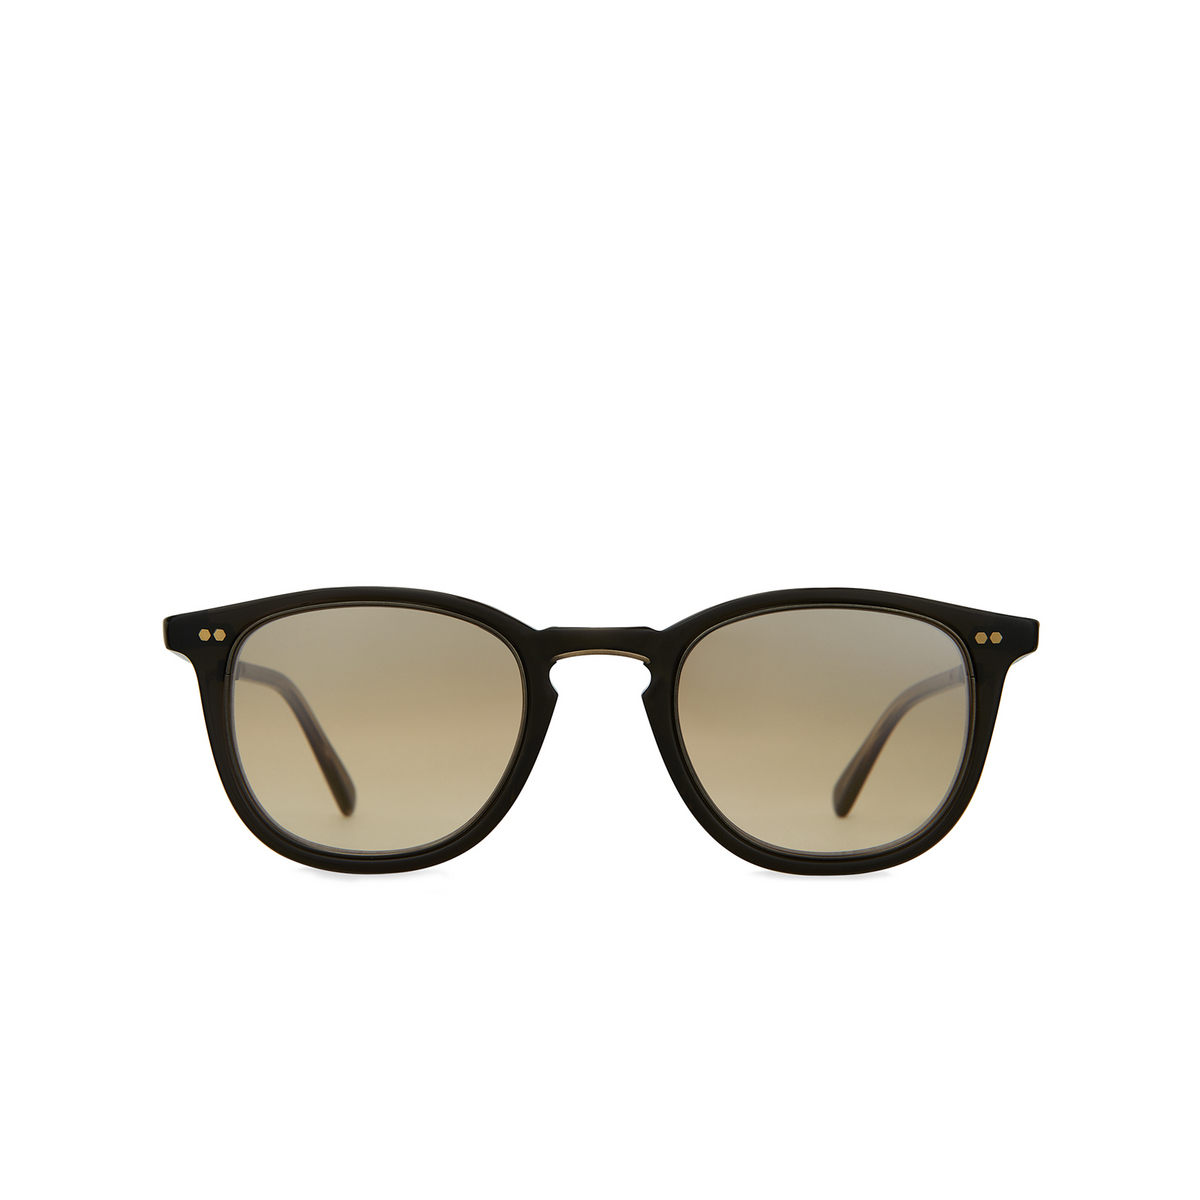 Mr. Leight COOPERS S Sunglasses BKTR-ATG/SMKY Black Tar - Antique Gold - front view